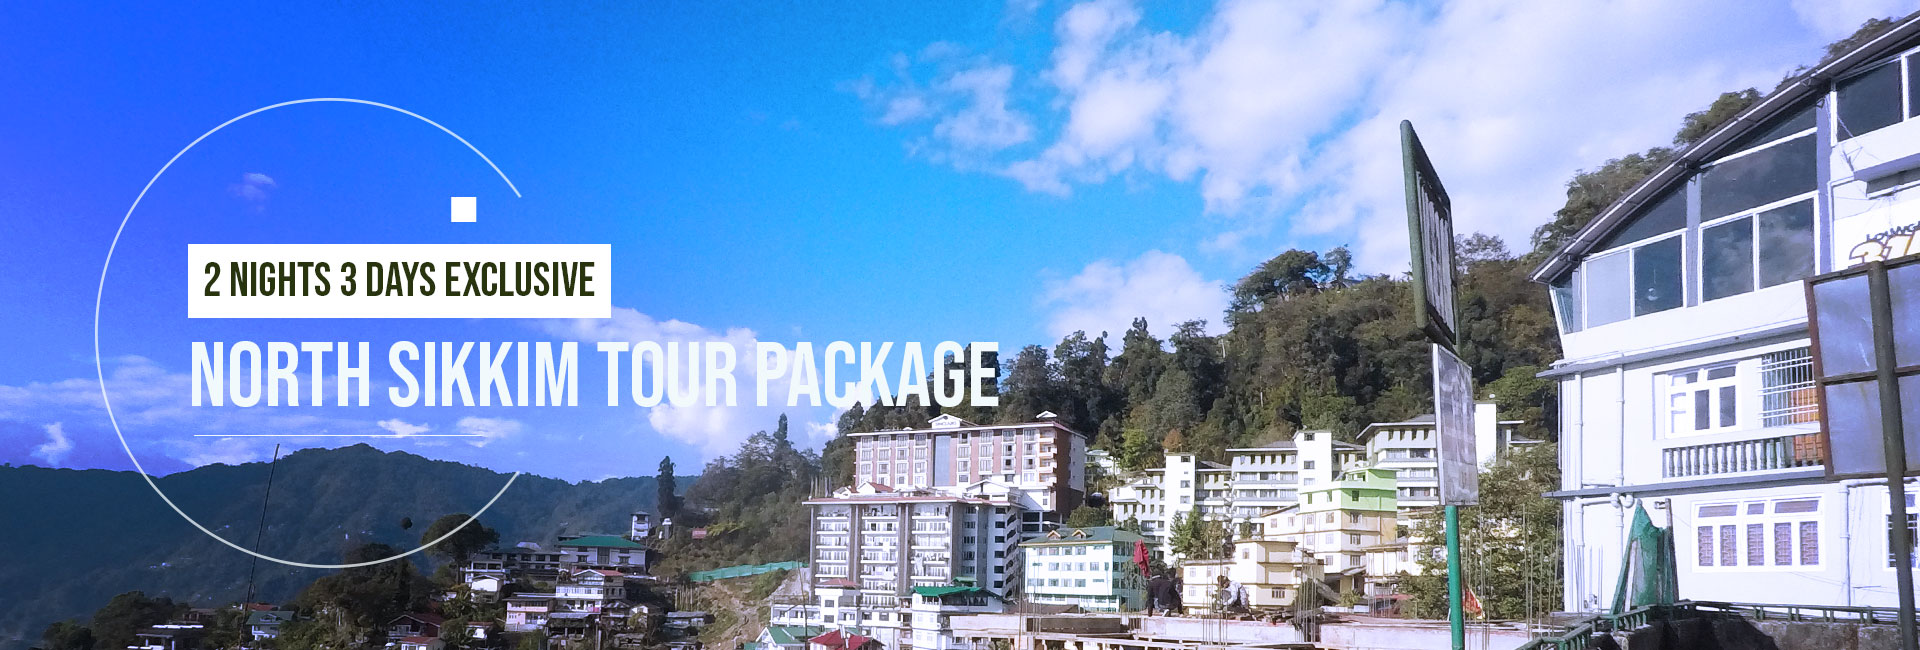 North Sikkim Tour Package 2 Nights 3 Days - Be An Explorer